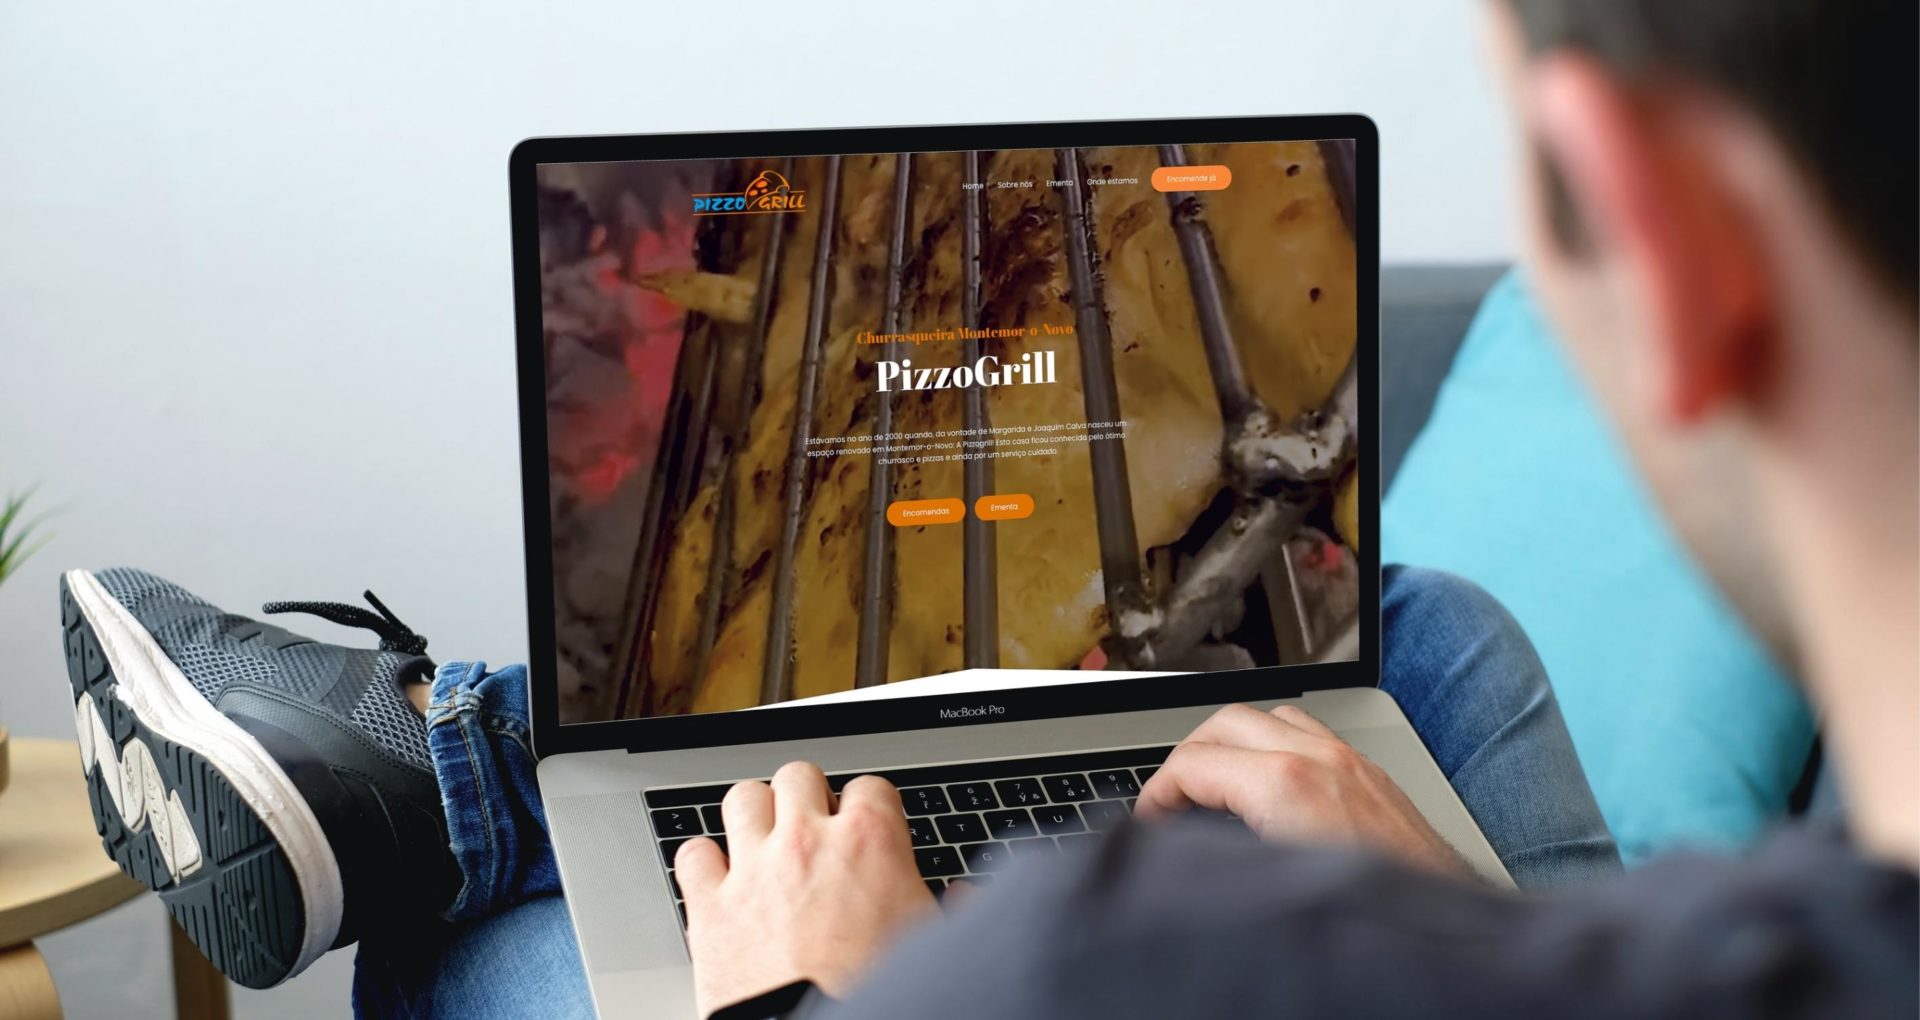 PIZZOGRILL-website-dwp